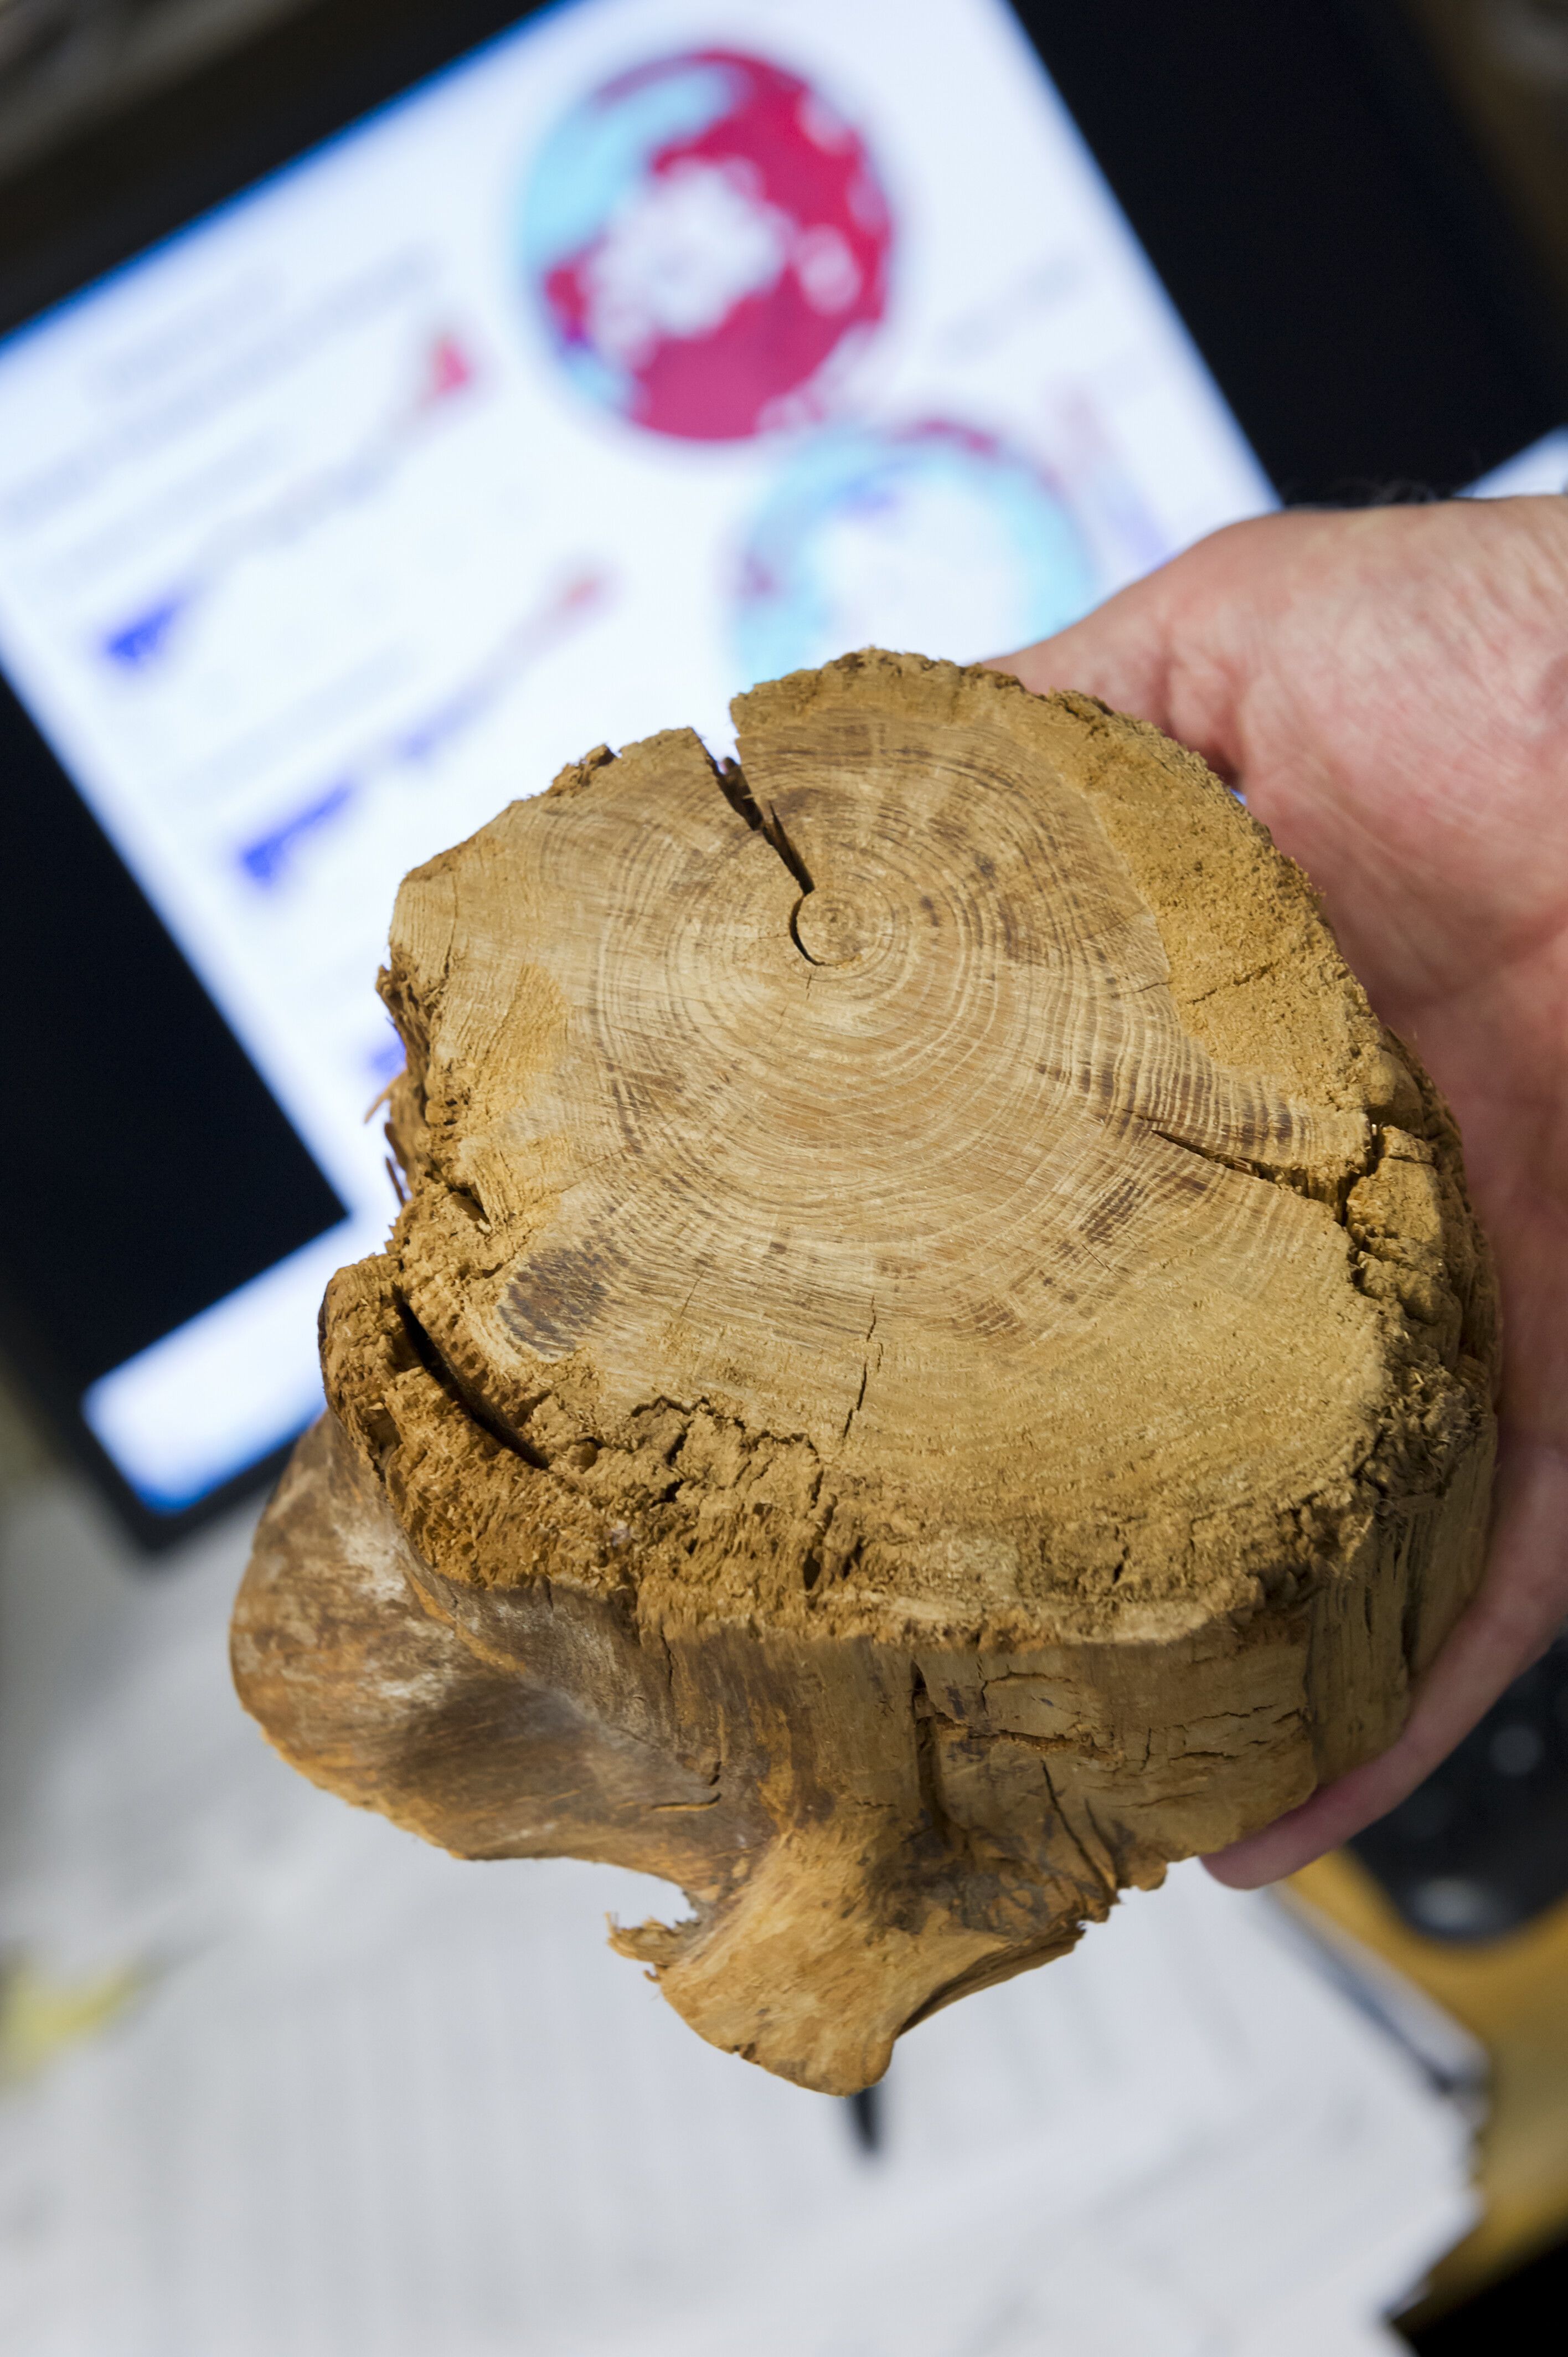 A researcher holds a section of tree trunk in fron of a computer screen showing global temperature data